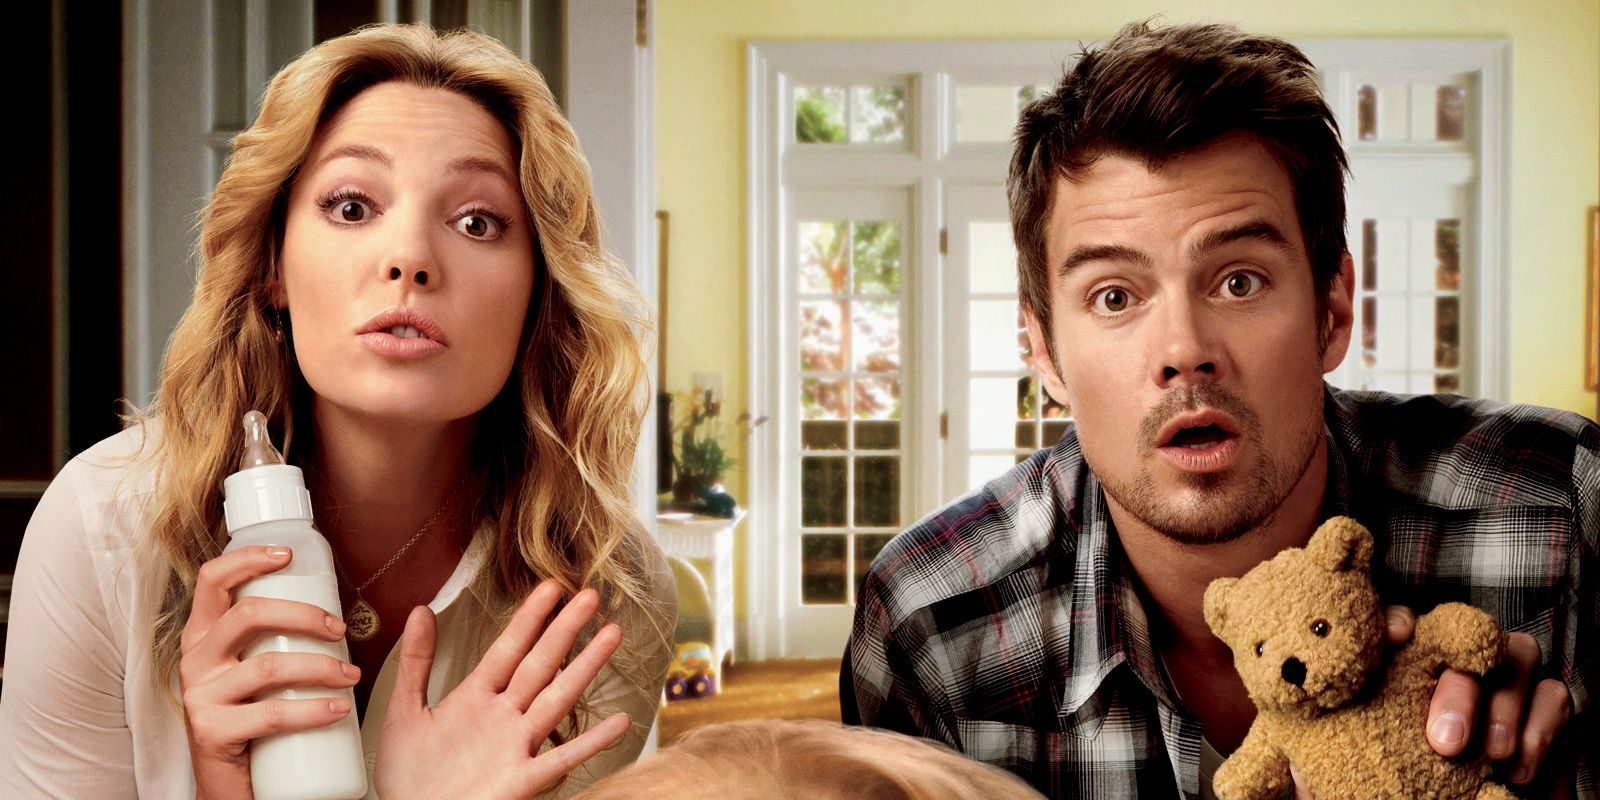 10 Romantic Comedies Critics Hated But Audiences Loved (According To Rotten Tomatoes)